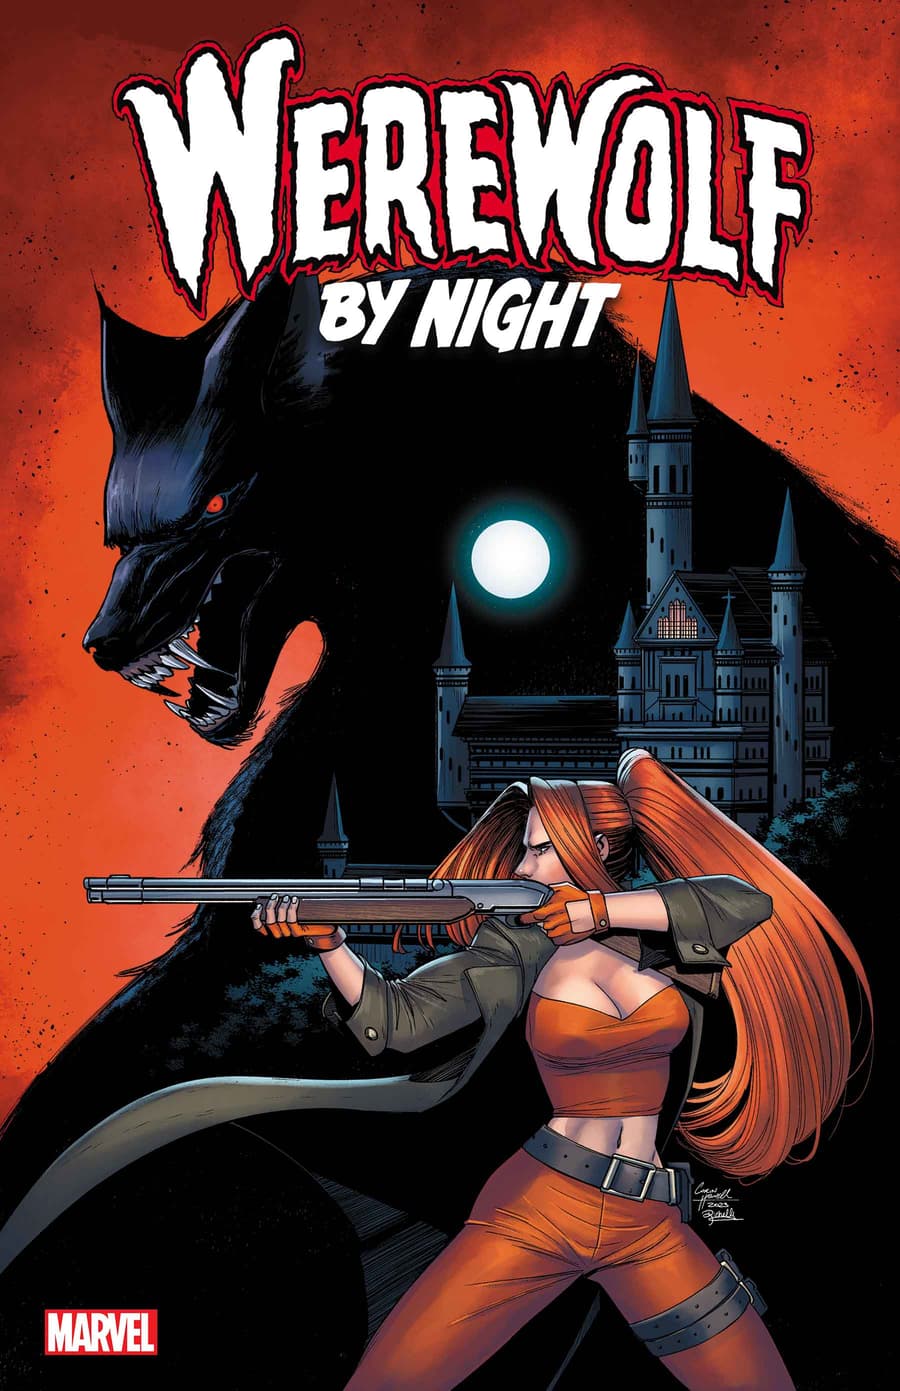 WEREWOLF BY NIGHT #1 cover by Corin Howell